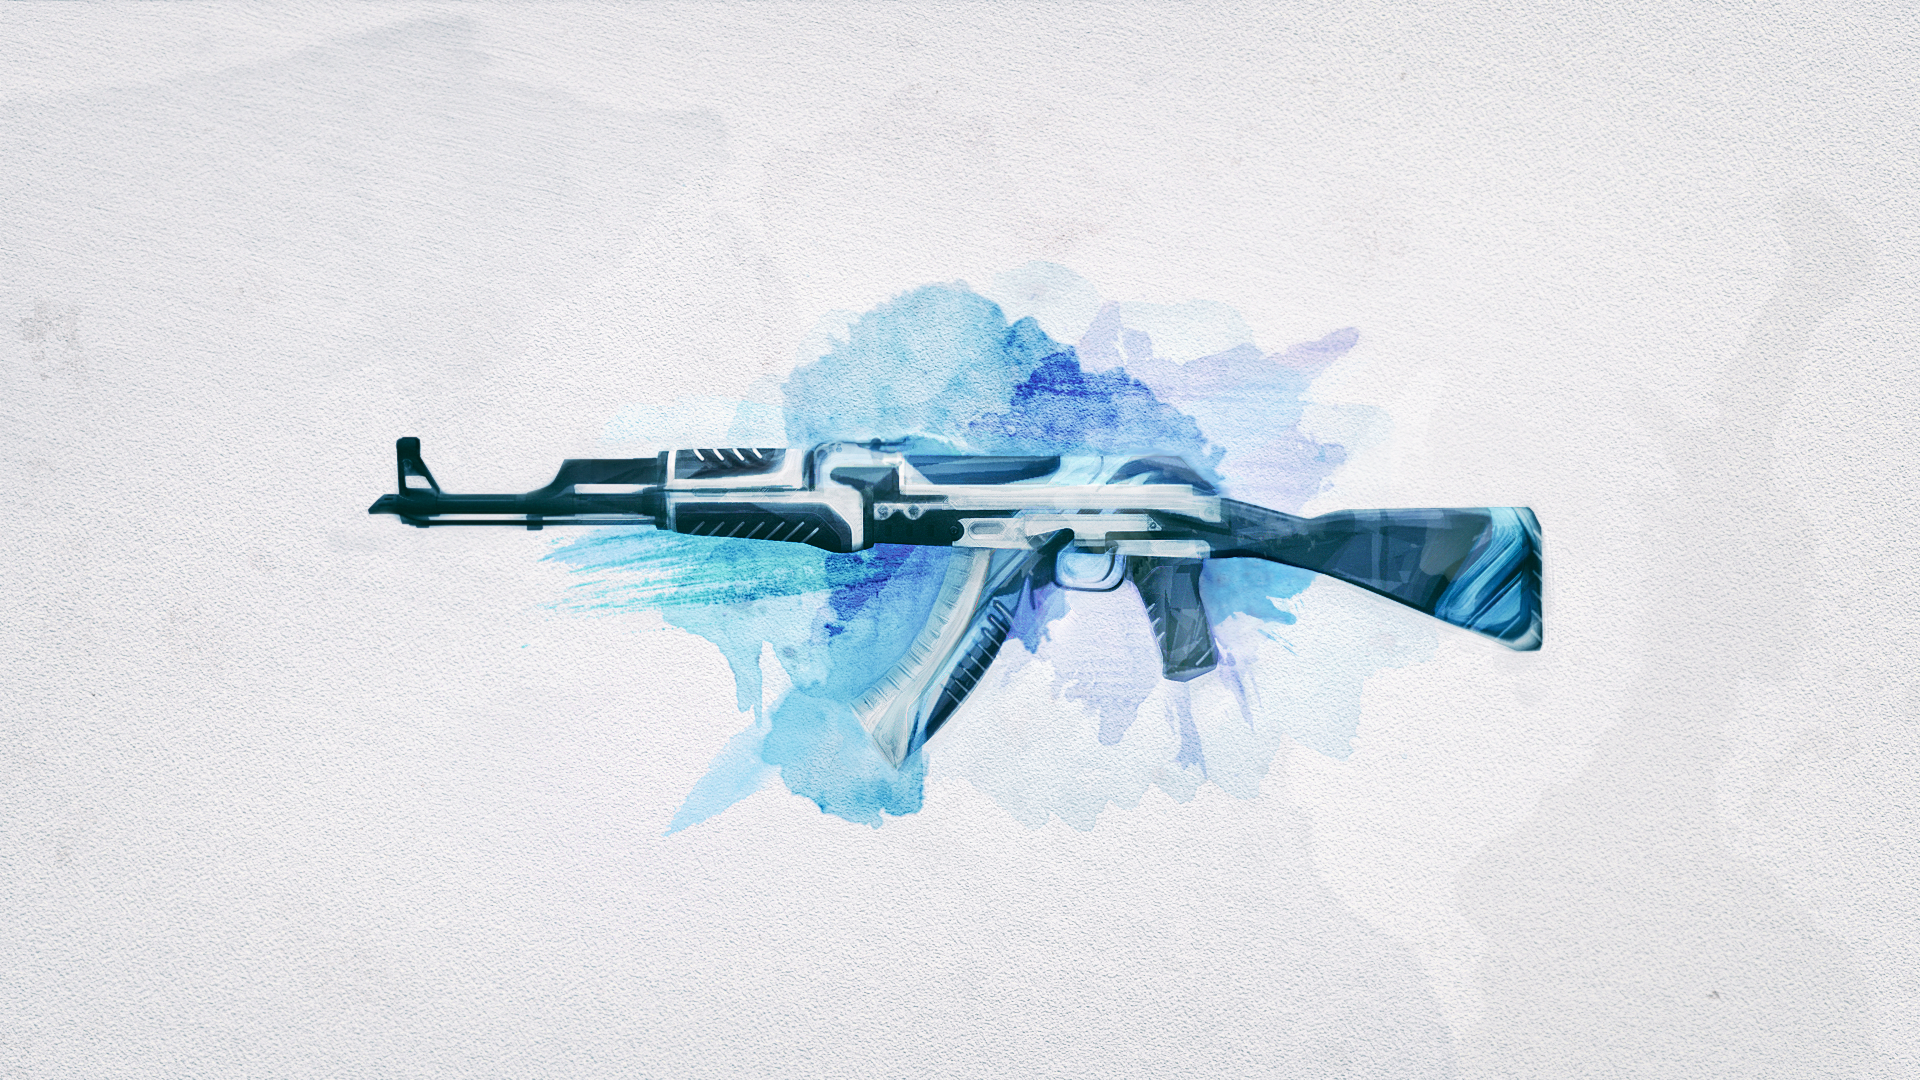 General 1920x1080 Counter-Strike: Global Offensive vulcan weapon simple background PC gaming cyan white background